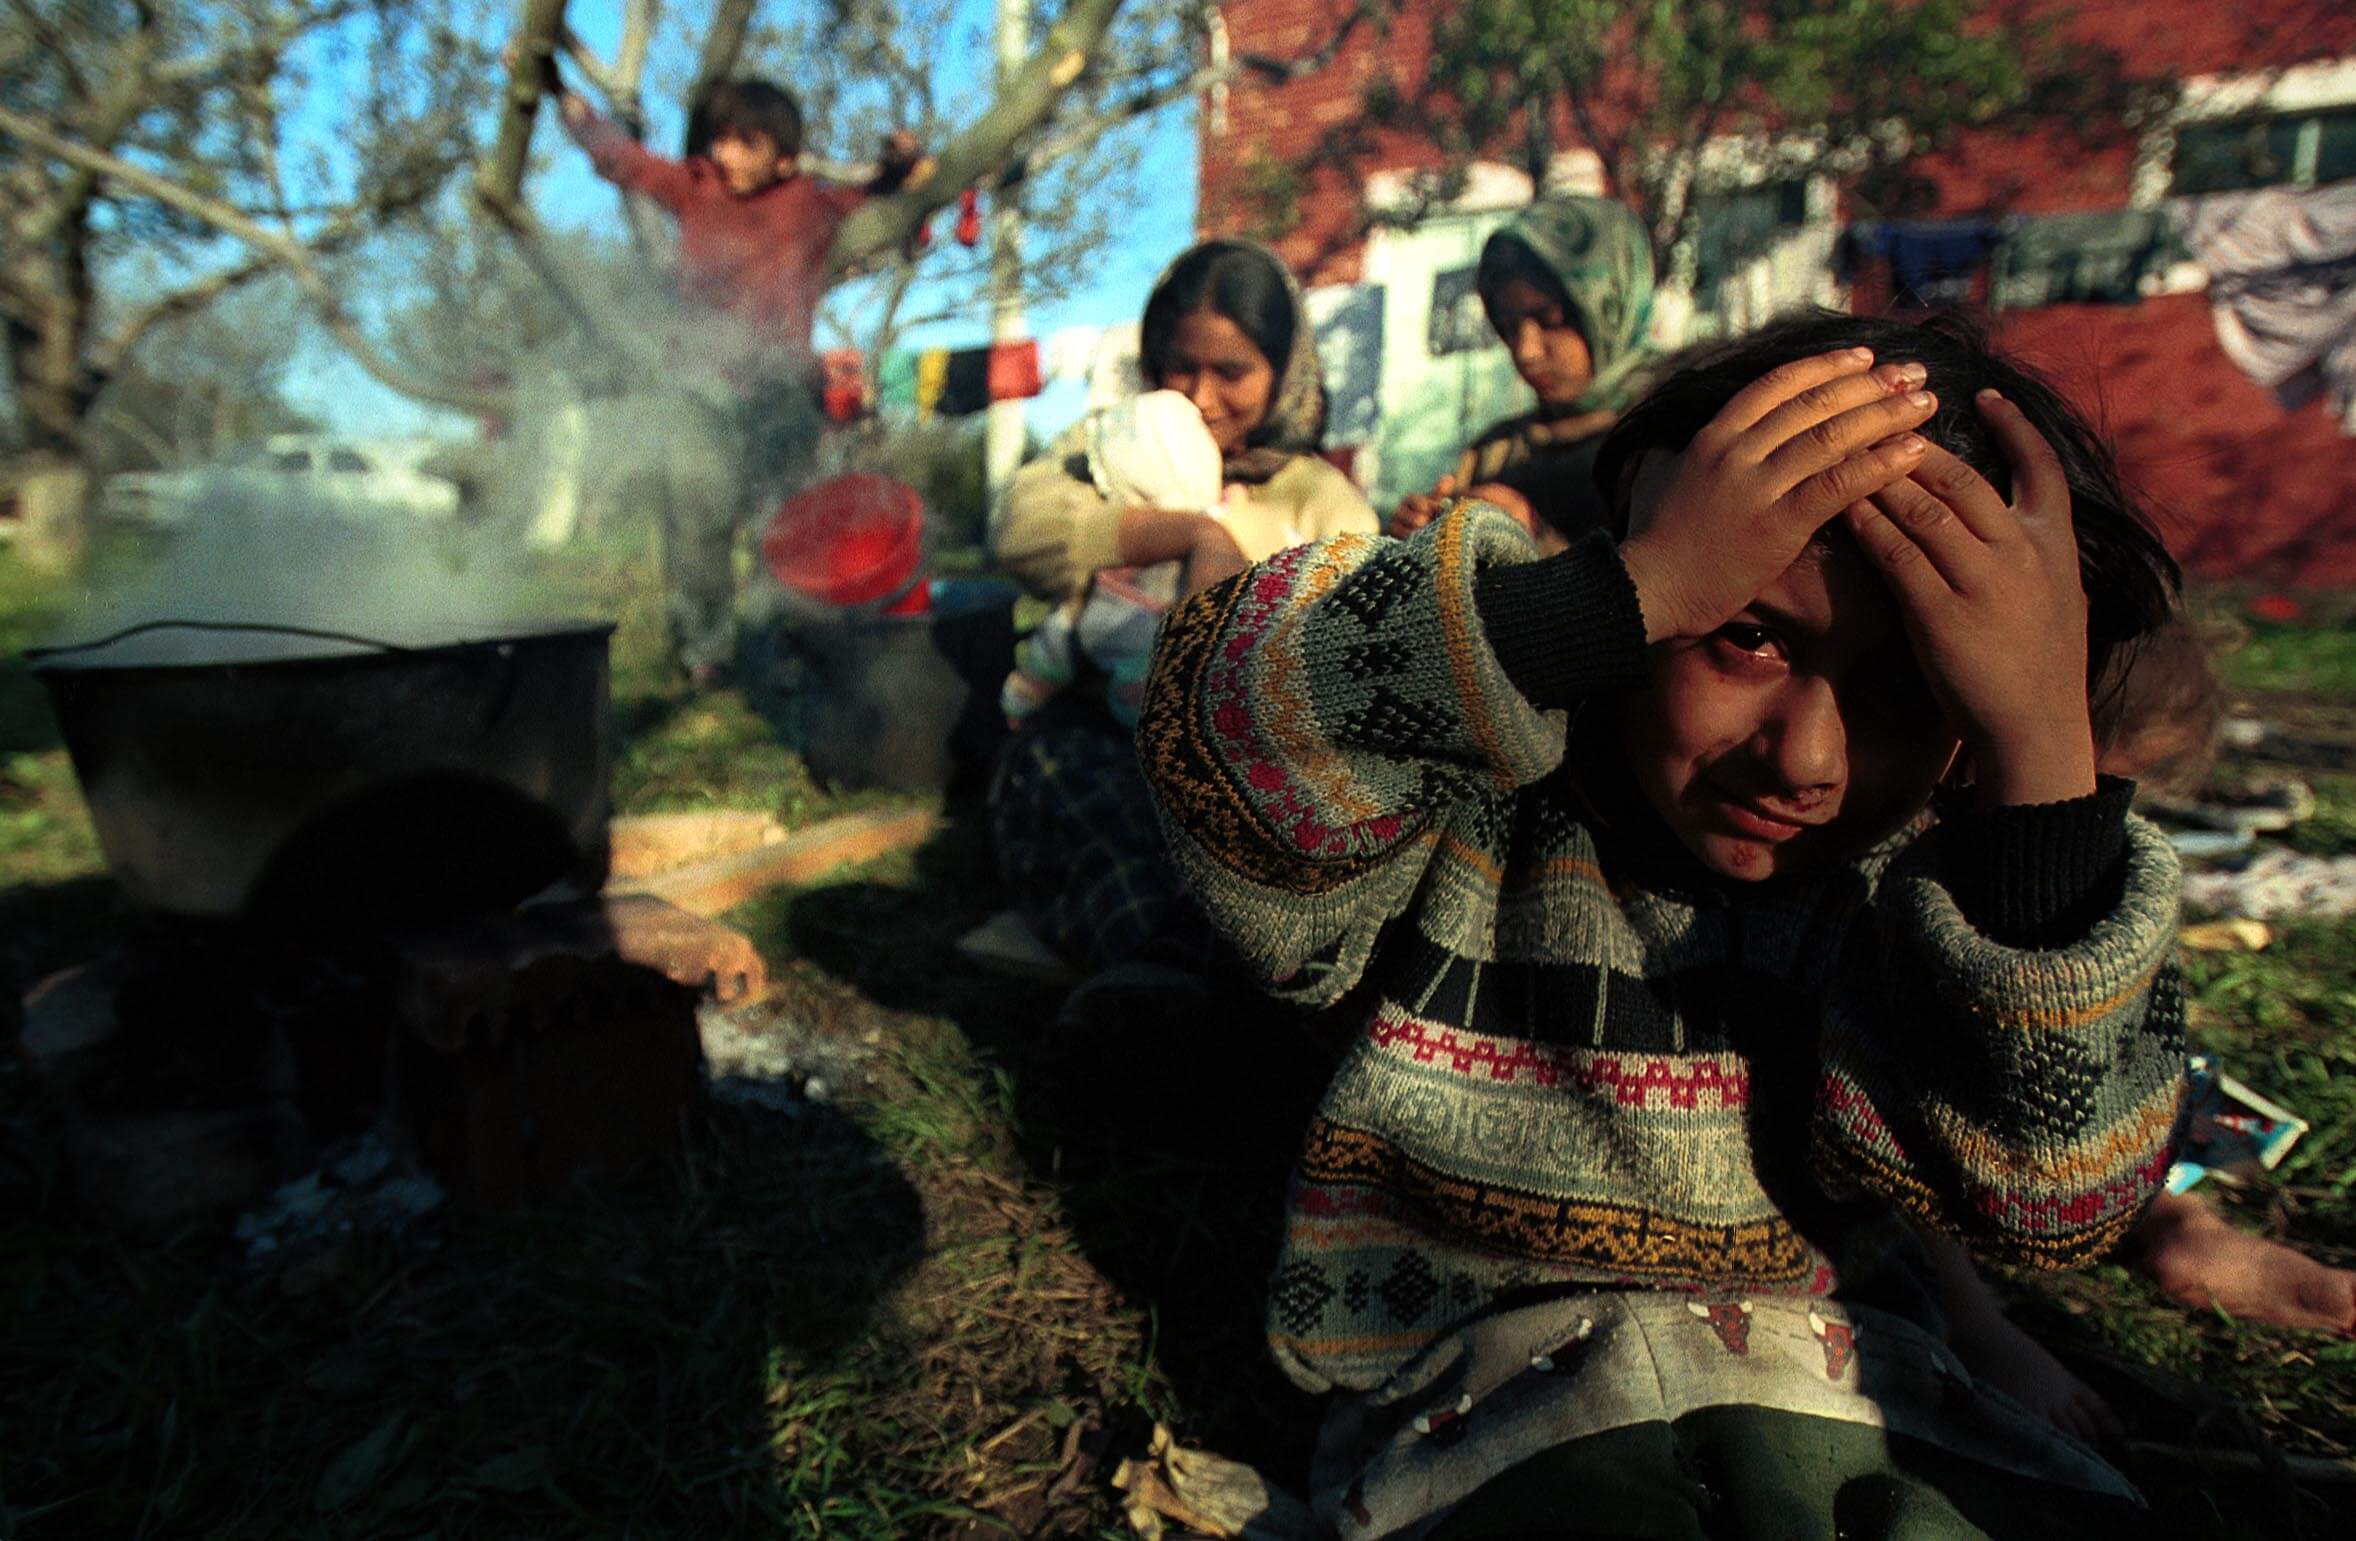 Image of a Roma family experiencing hardship